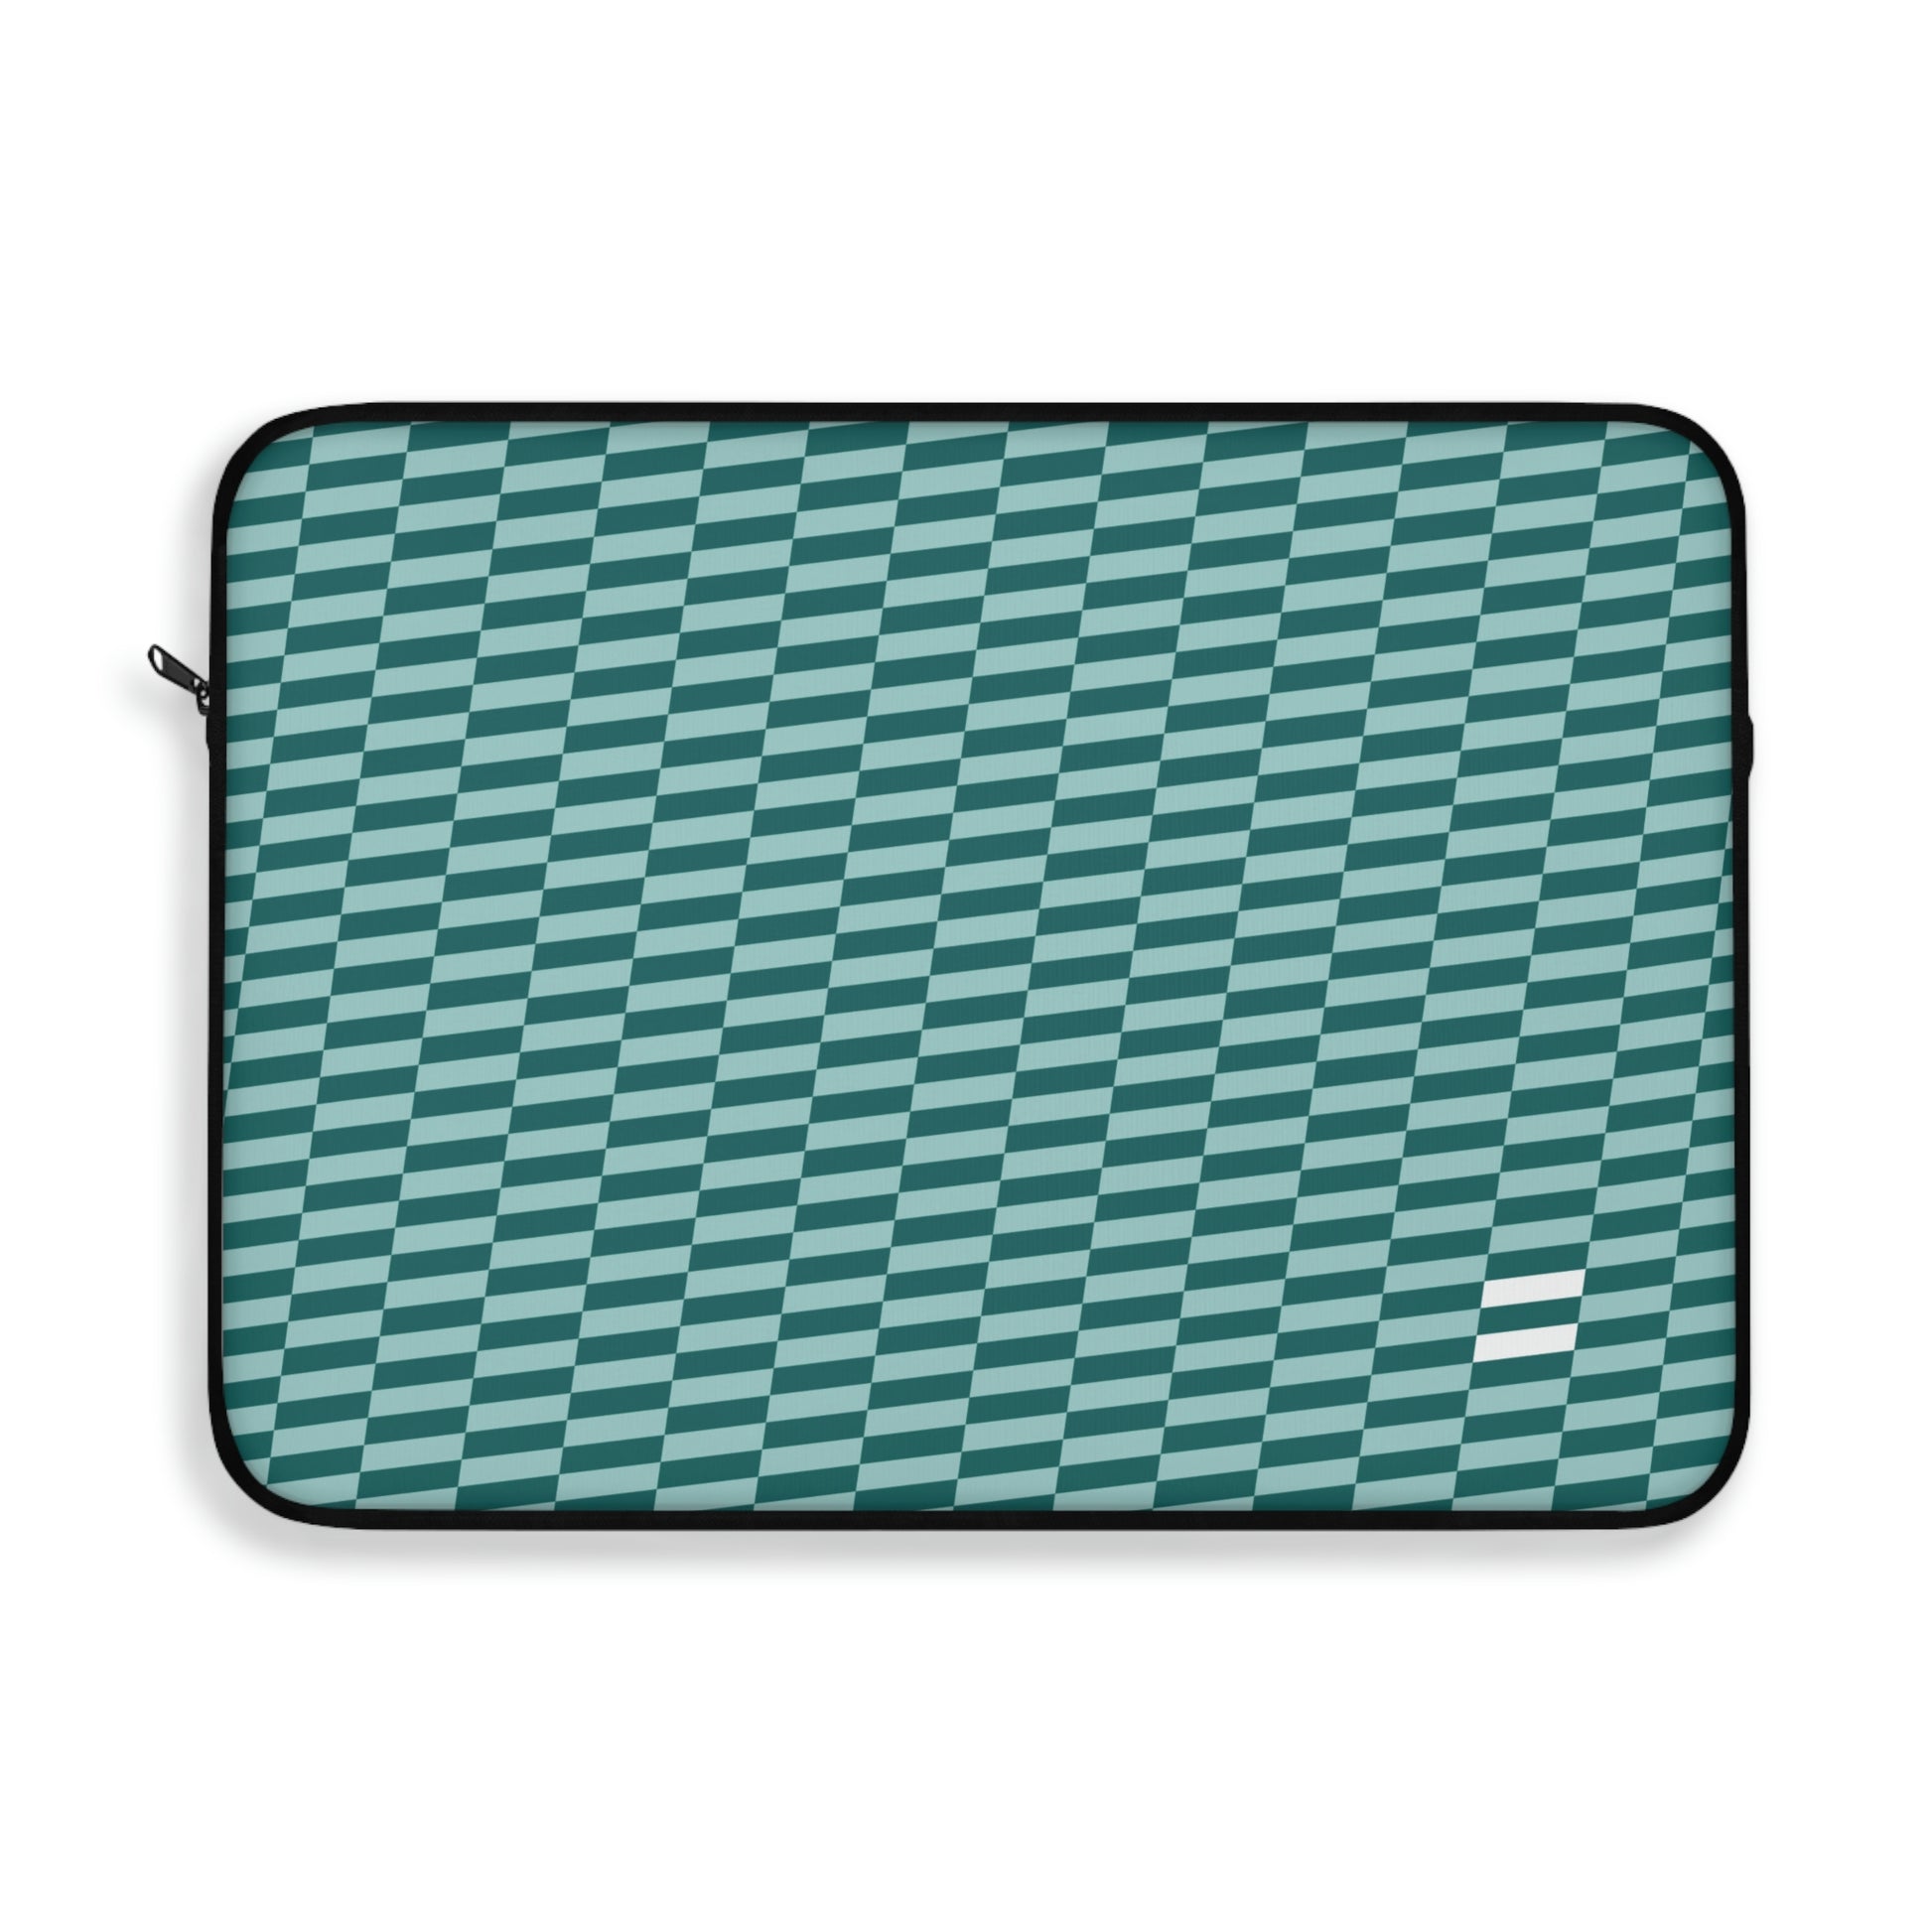 A soft laptop case with a zipper on top. The back side is solid black, and the inside is lined with solid black soft fabric. The front is printed with the Equality Check pattern in dark and light teal, with a white equal sign in the bottom right corner.